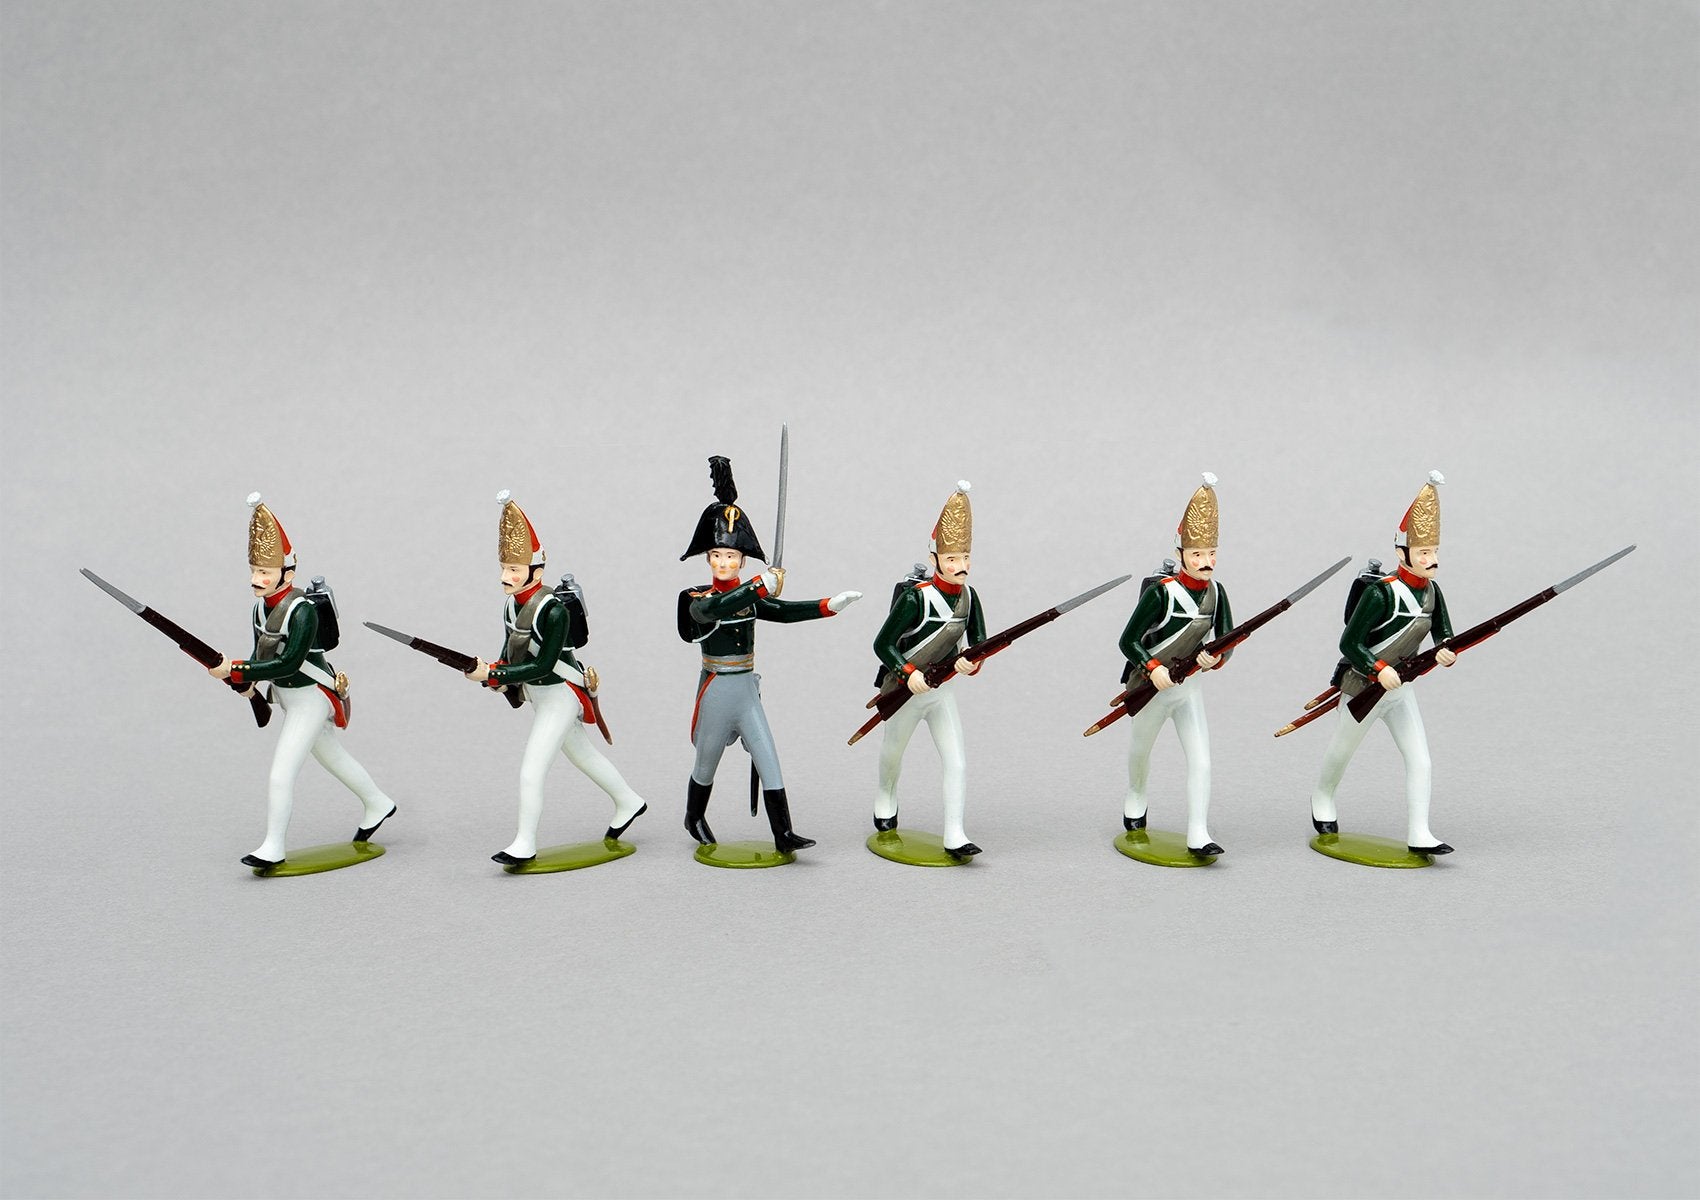 Set 151 Pavlovski Grenadiers, 1806 | Russian Infantry | Napoleonic Wars | Five men with mitre cap advancing, one officer | Waterloo | © Imperial Productions | Sculpt by David Cowe